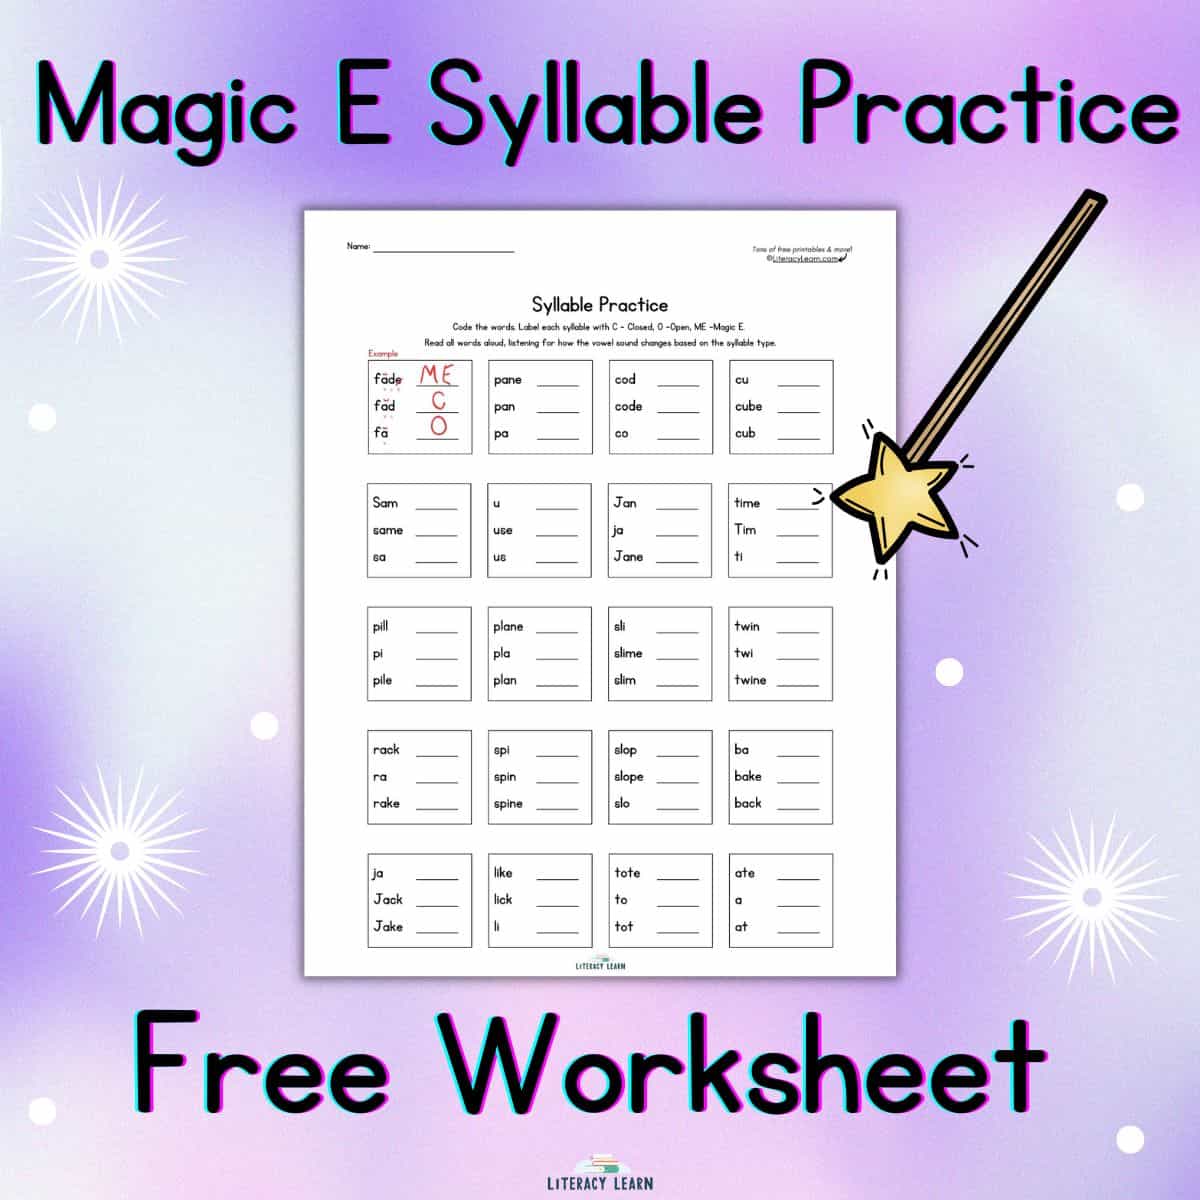 Purple image with title "Magic E Syllable Practice" with picture of the worksheet and a magic wand.